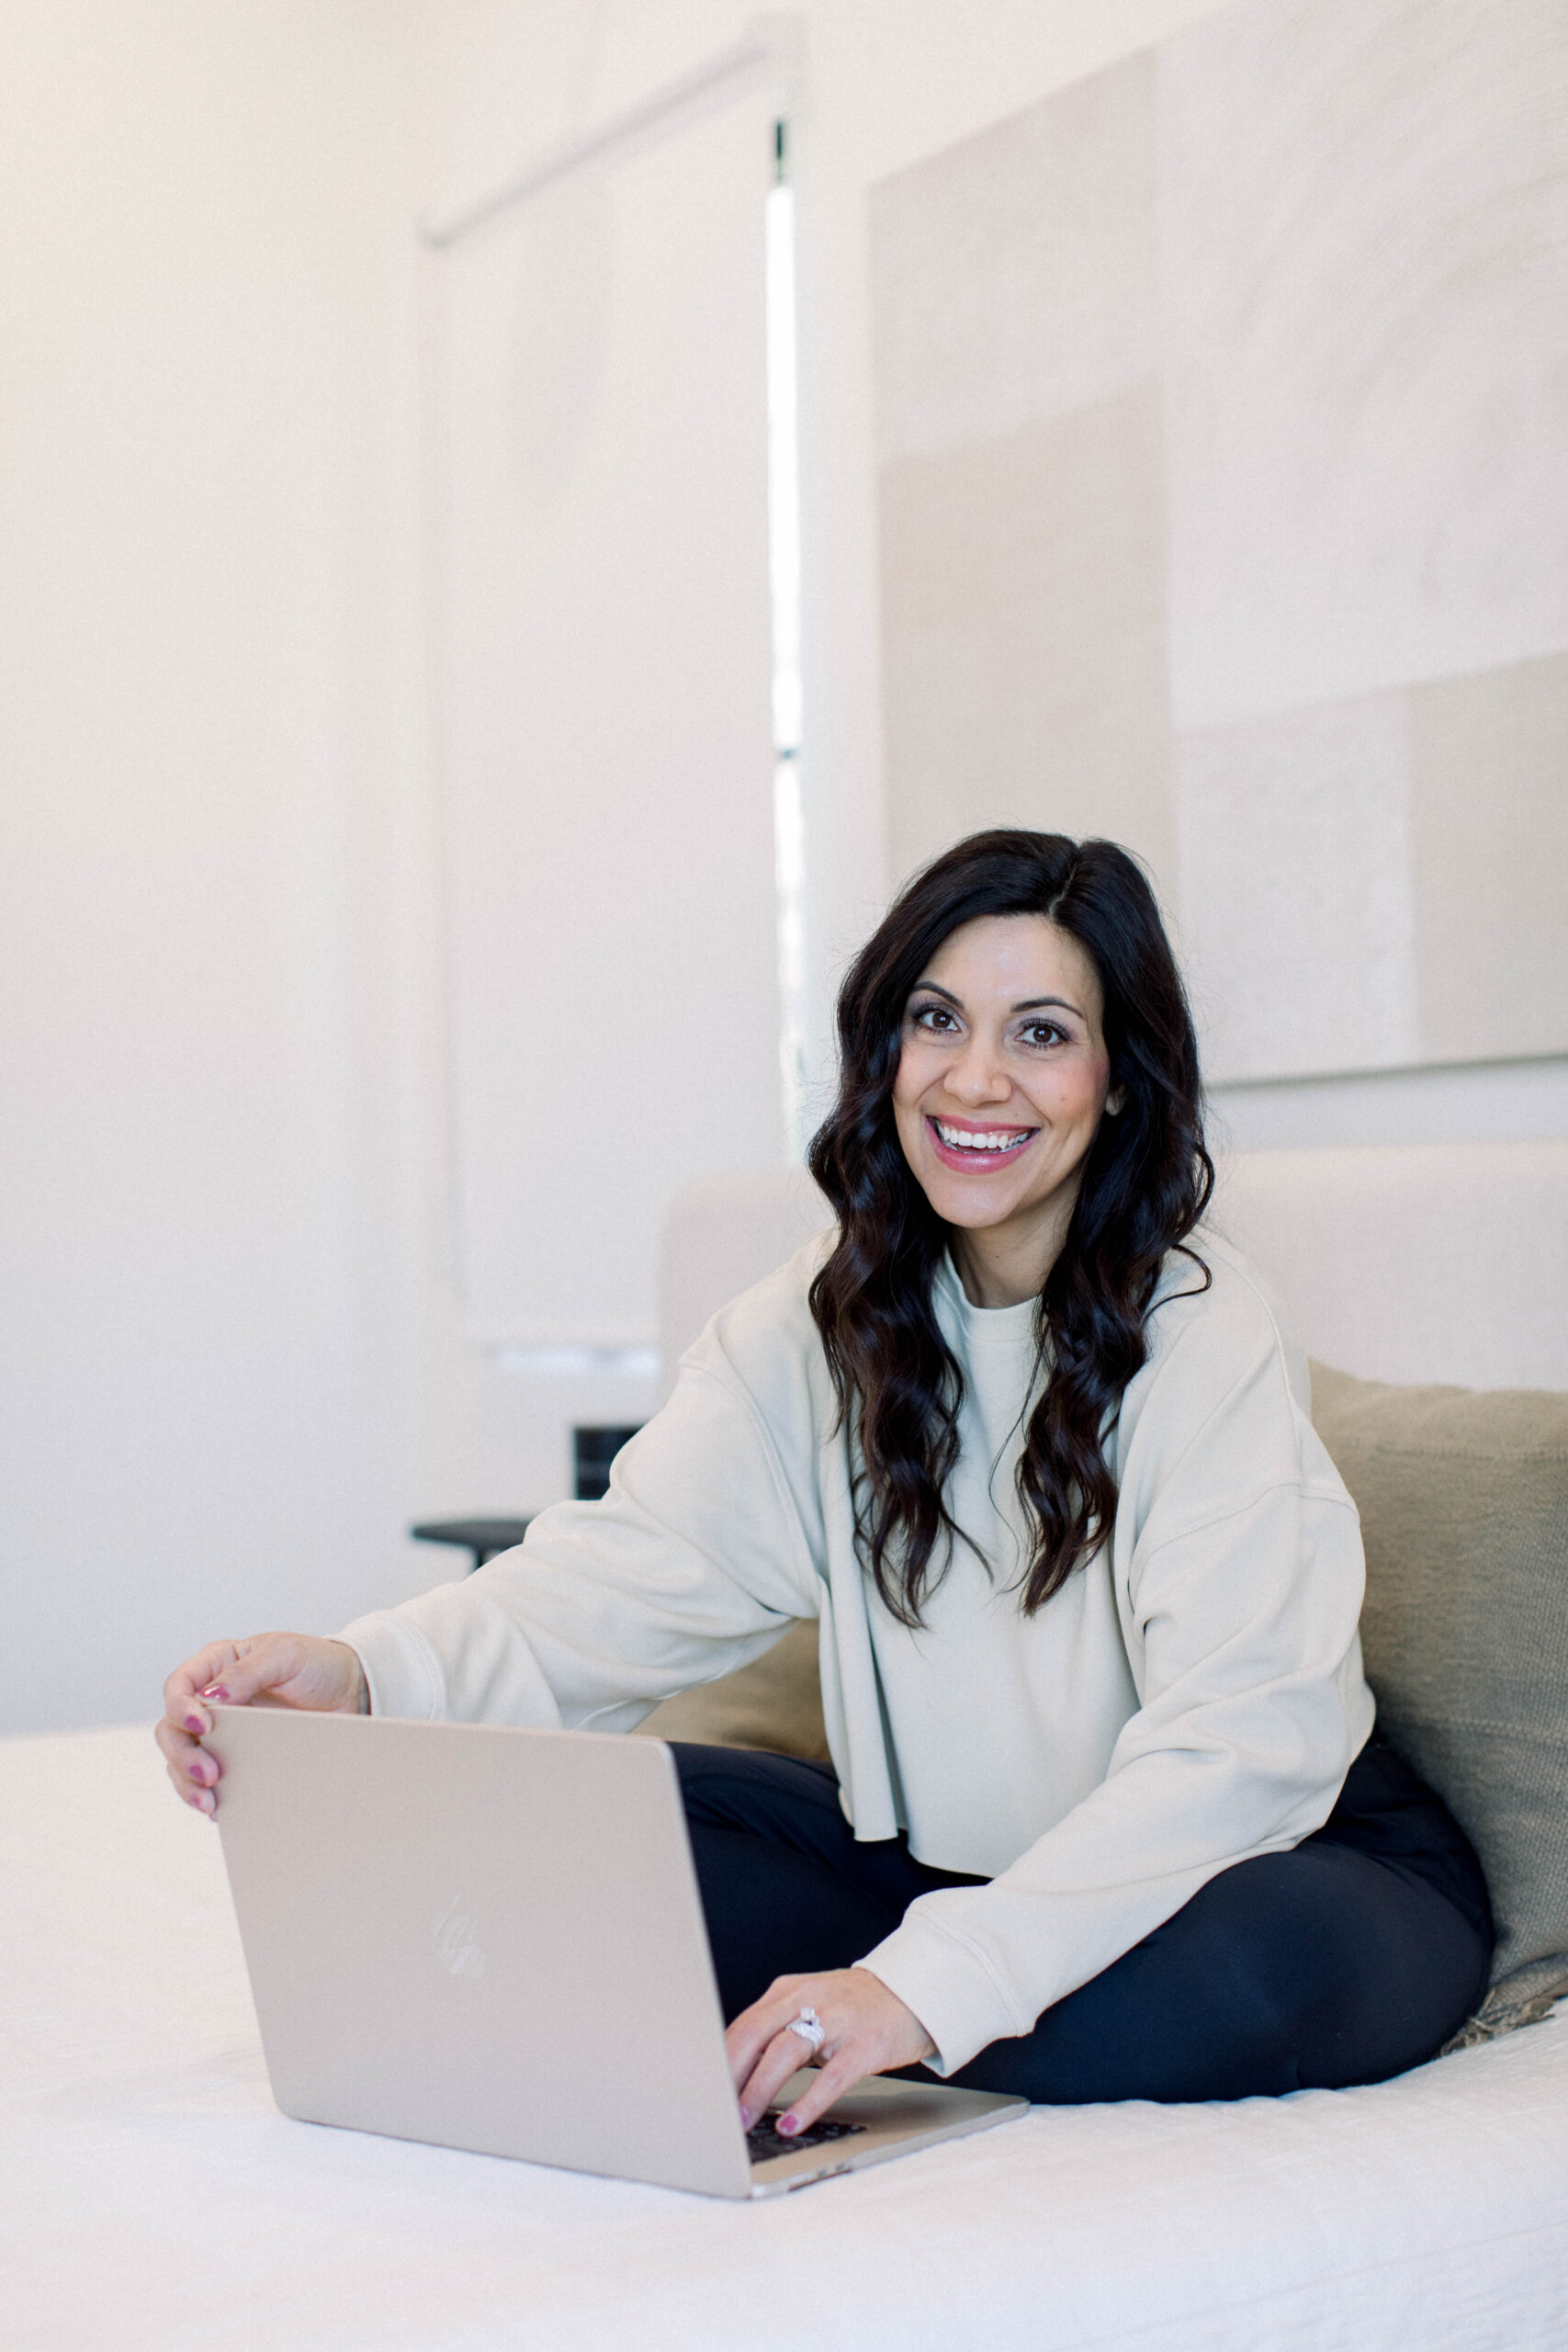 Dark haired woman smiling while holding open her computer.